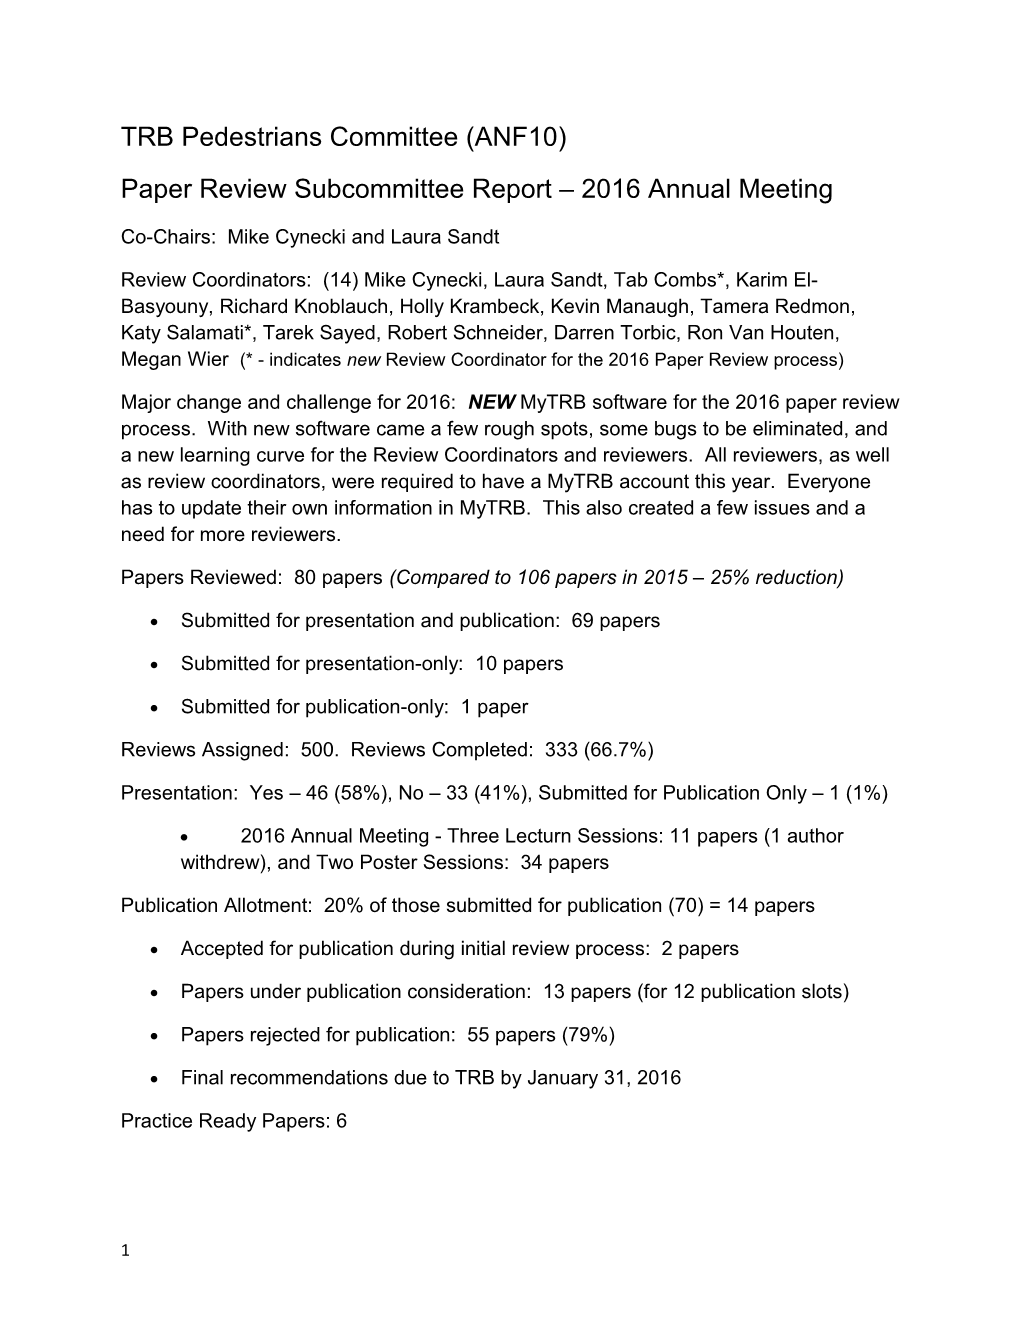 Paper Review Subcommittee Report 2016 Annual Meeting